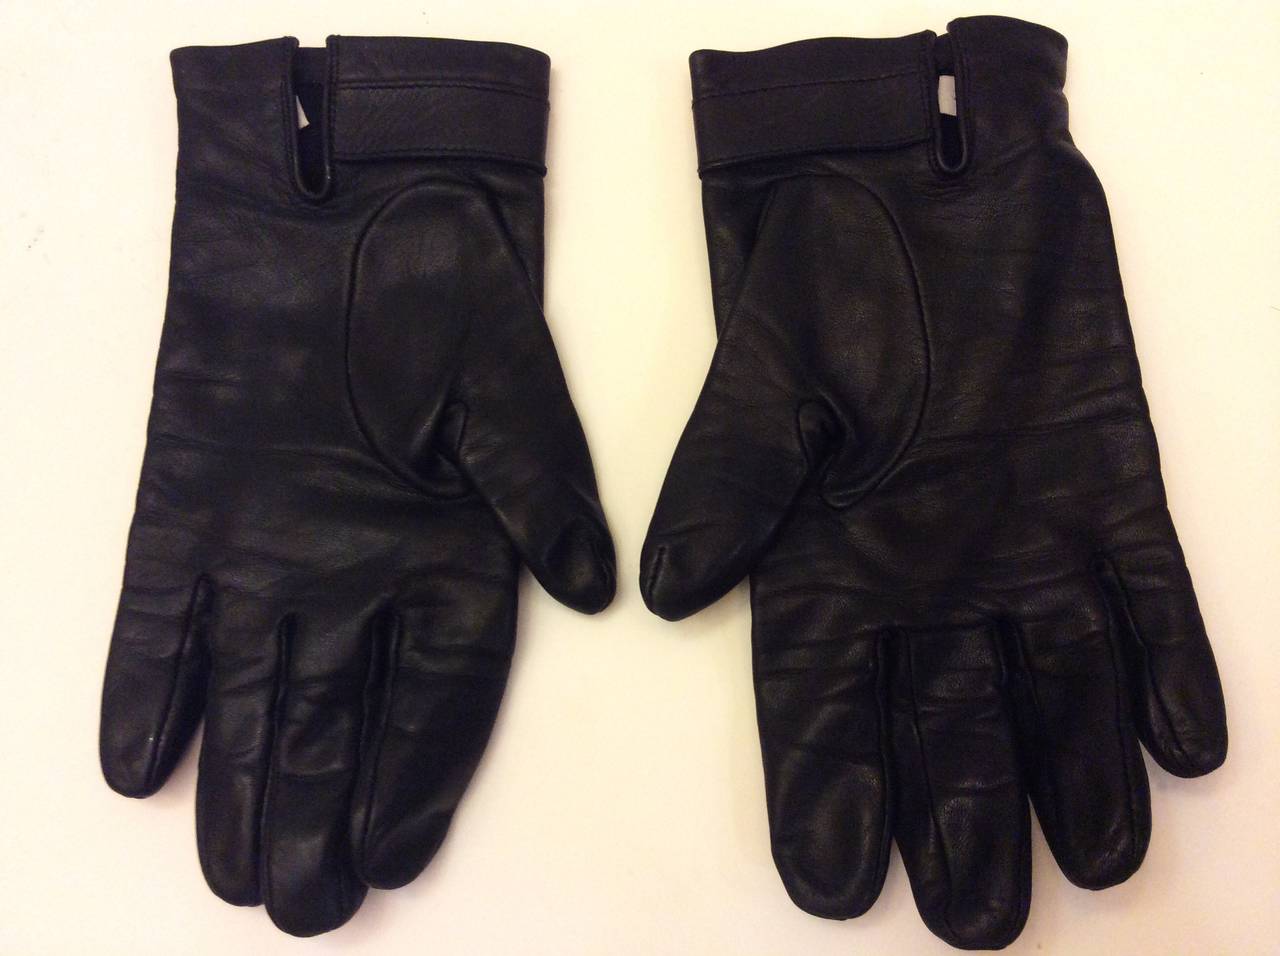 Christian Dior Black Leather Gloves In Excellent Condition For Sale In Lake Park, FL